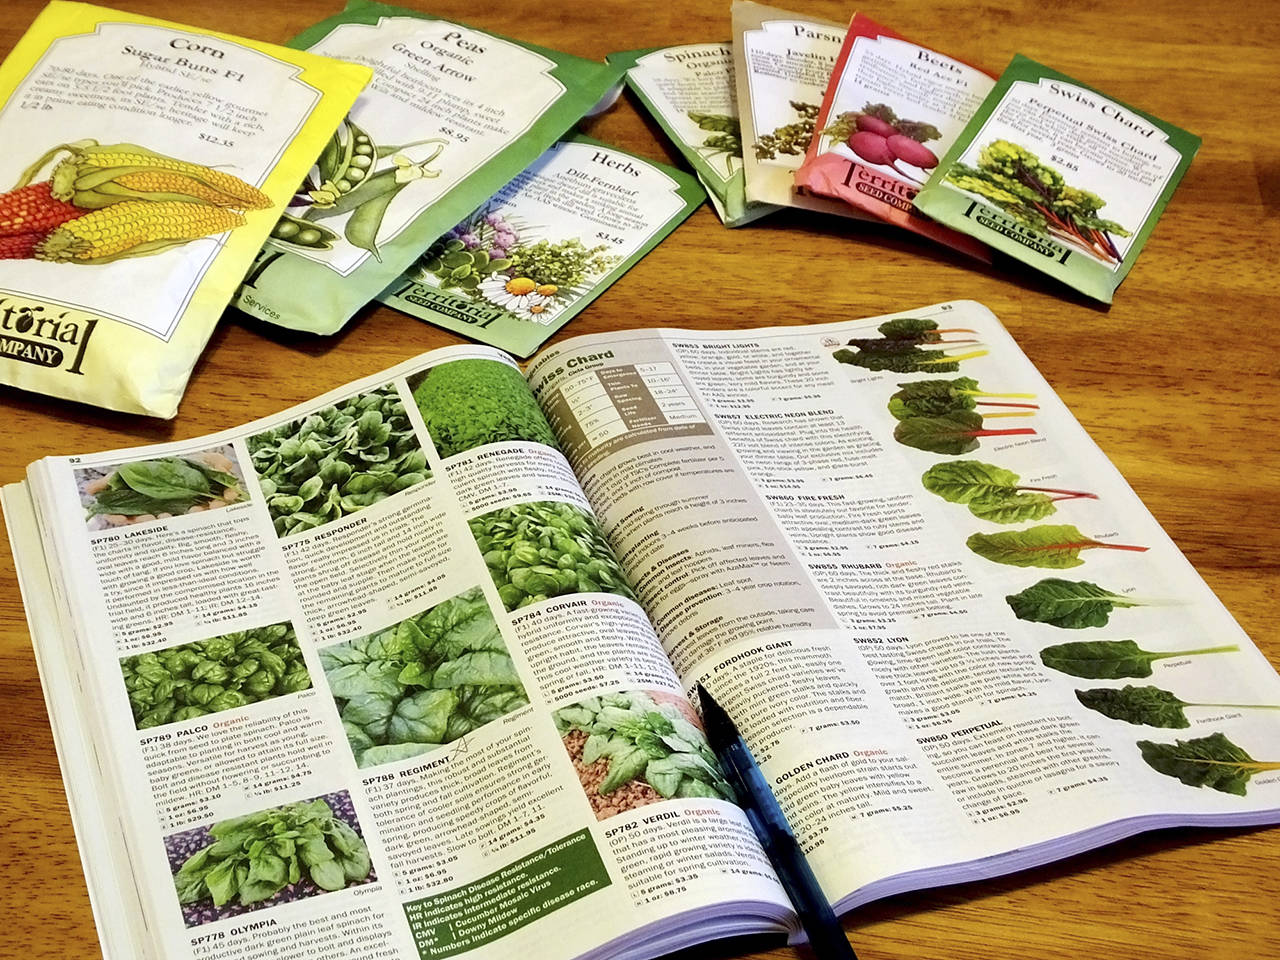 Linda Severson                                Soon after Christmas, seed catalogs start to appear in mailboxes and electronic inboxes.